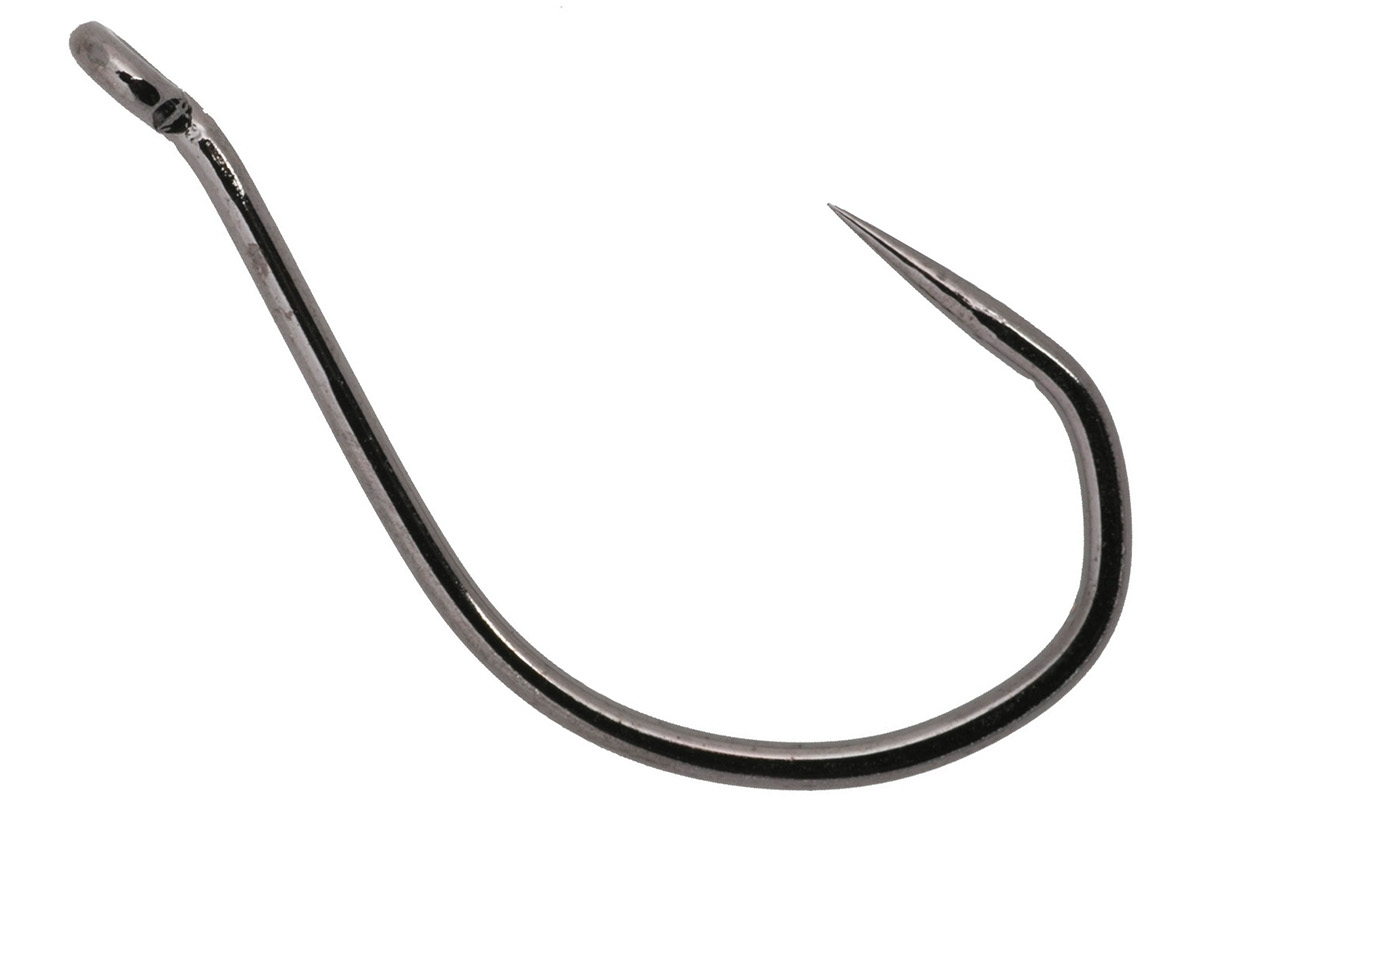 Owner Single Replacemant Hook, Needle Point, XXX Pro Pack, 1/0, 22pk (4302-119)